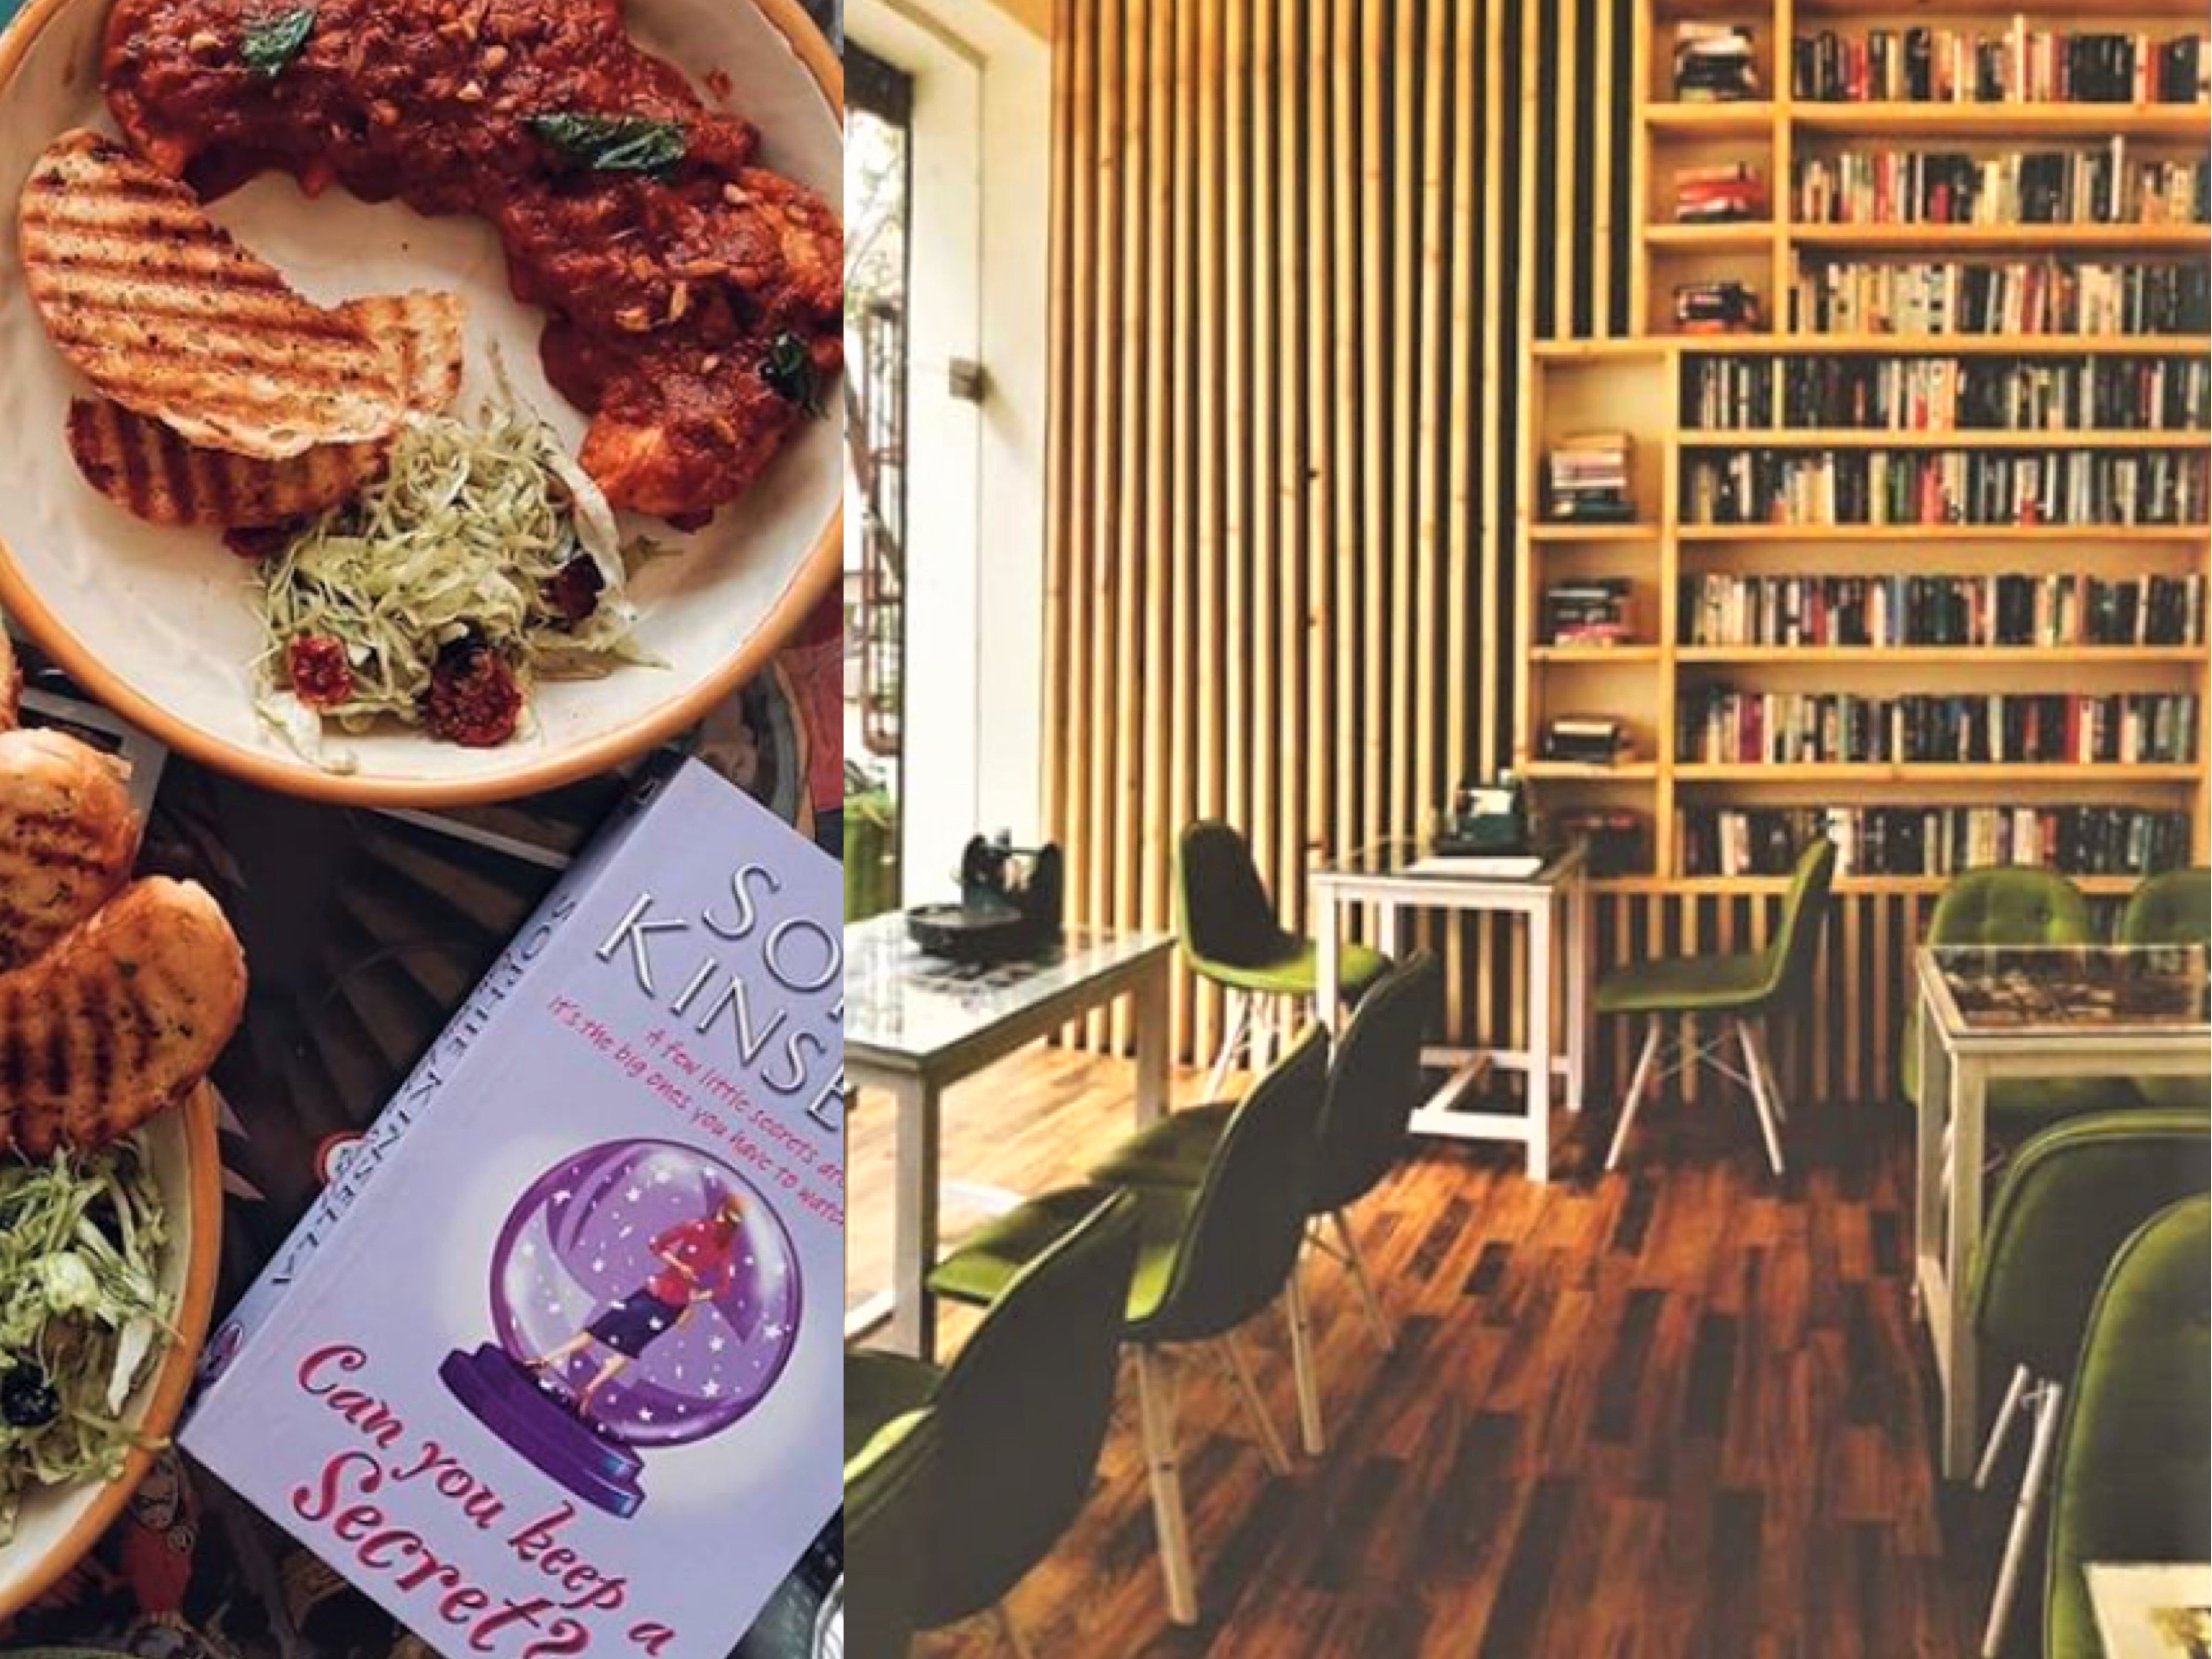 Get A Free Book With Your Meal At The Nerdy Indian Cafe